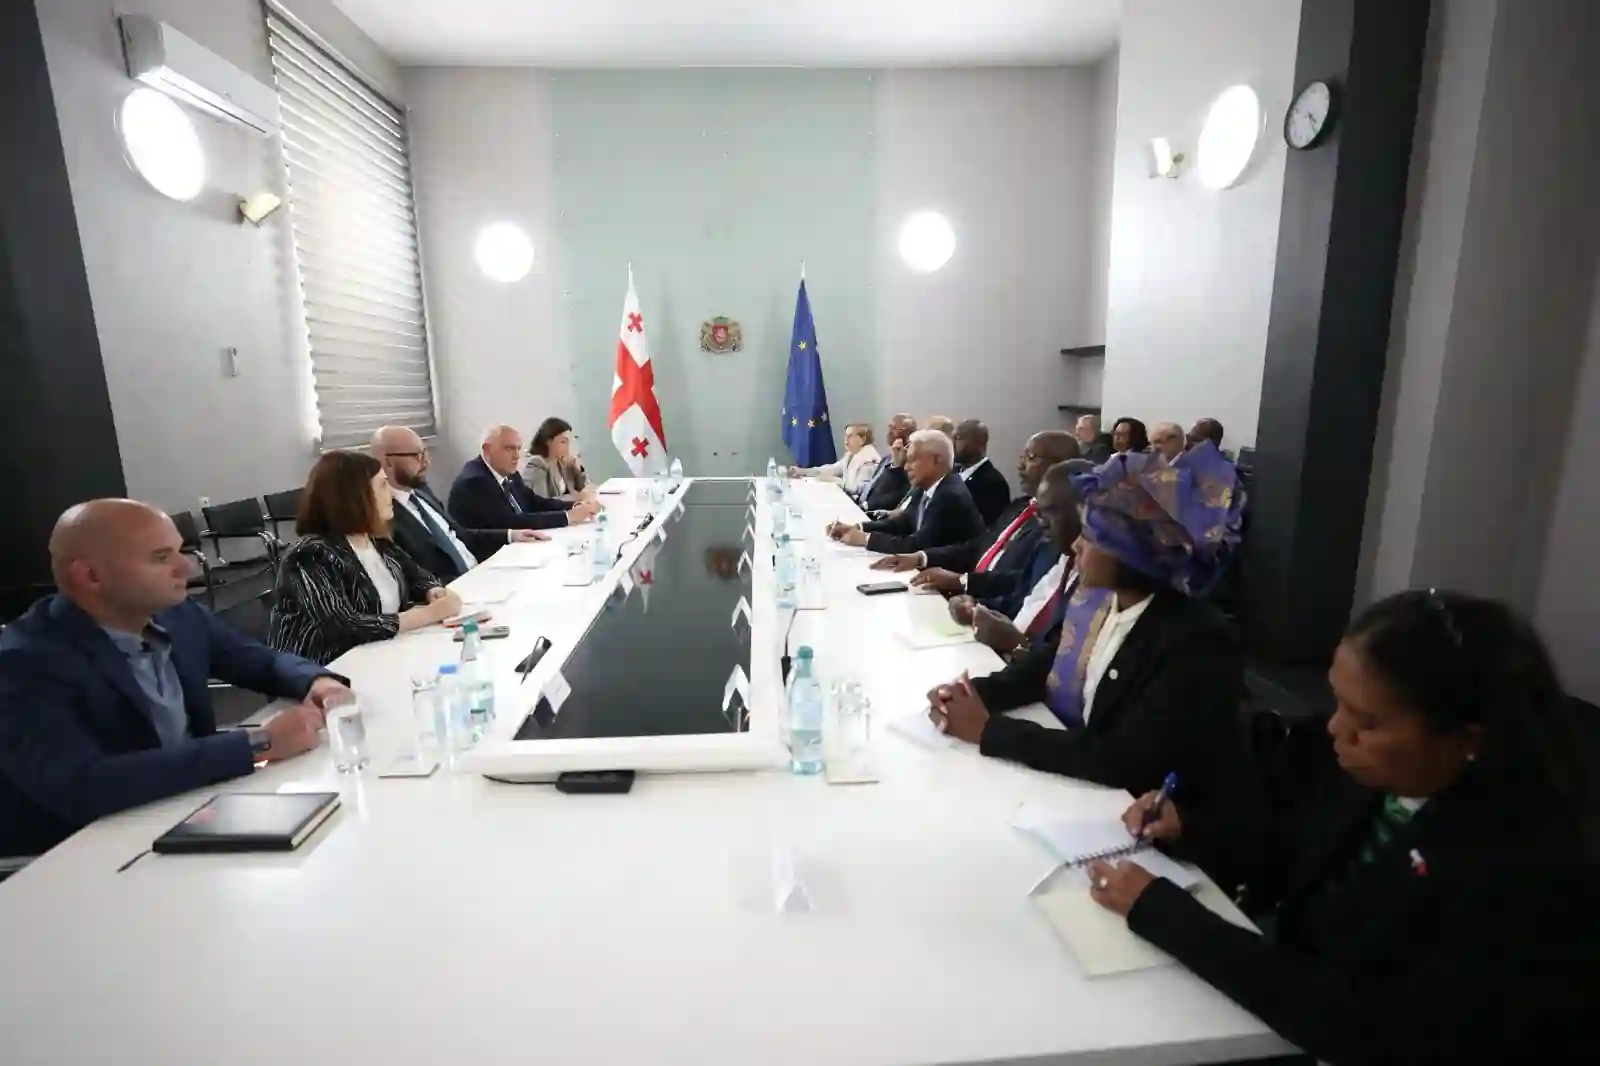 Georgia and CPLP countries strengthen their ties